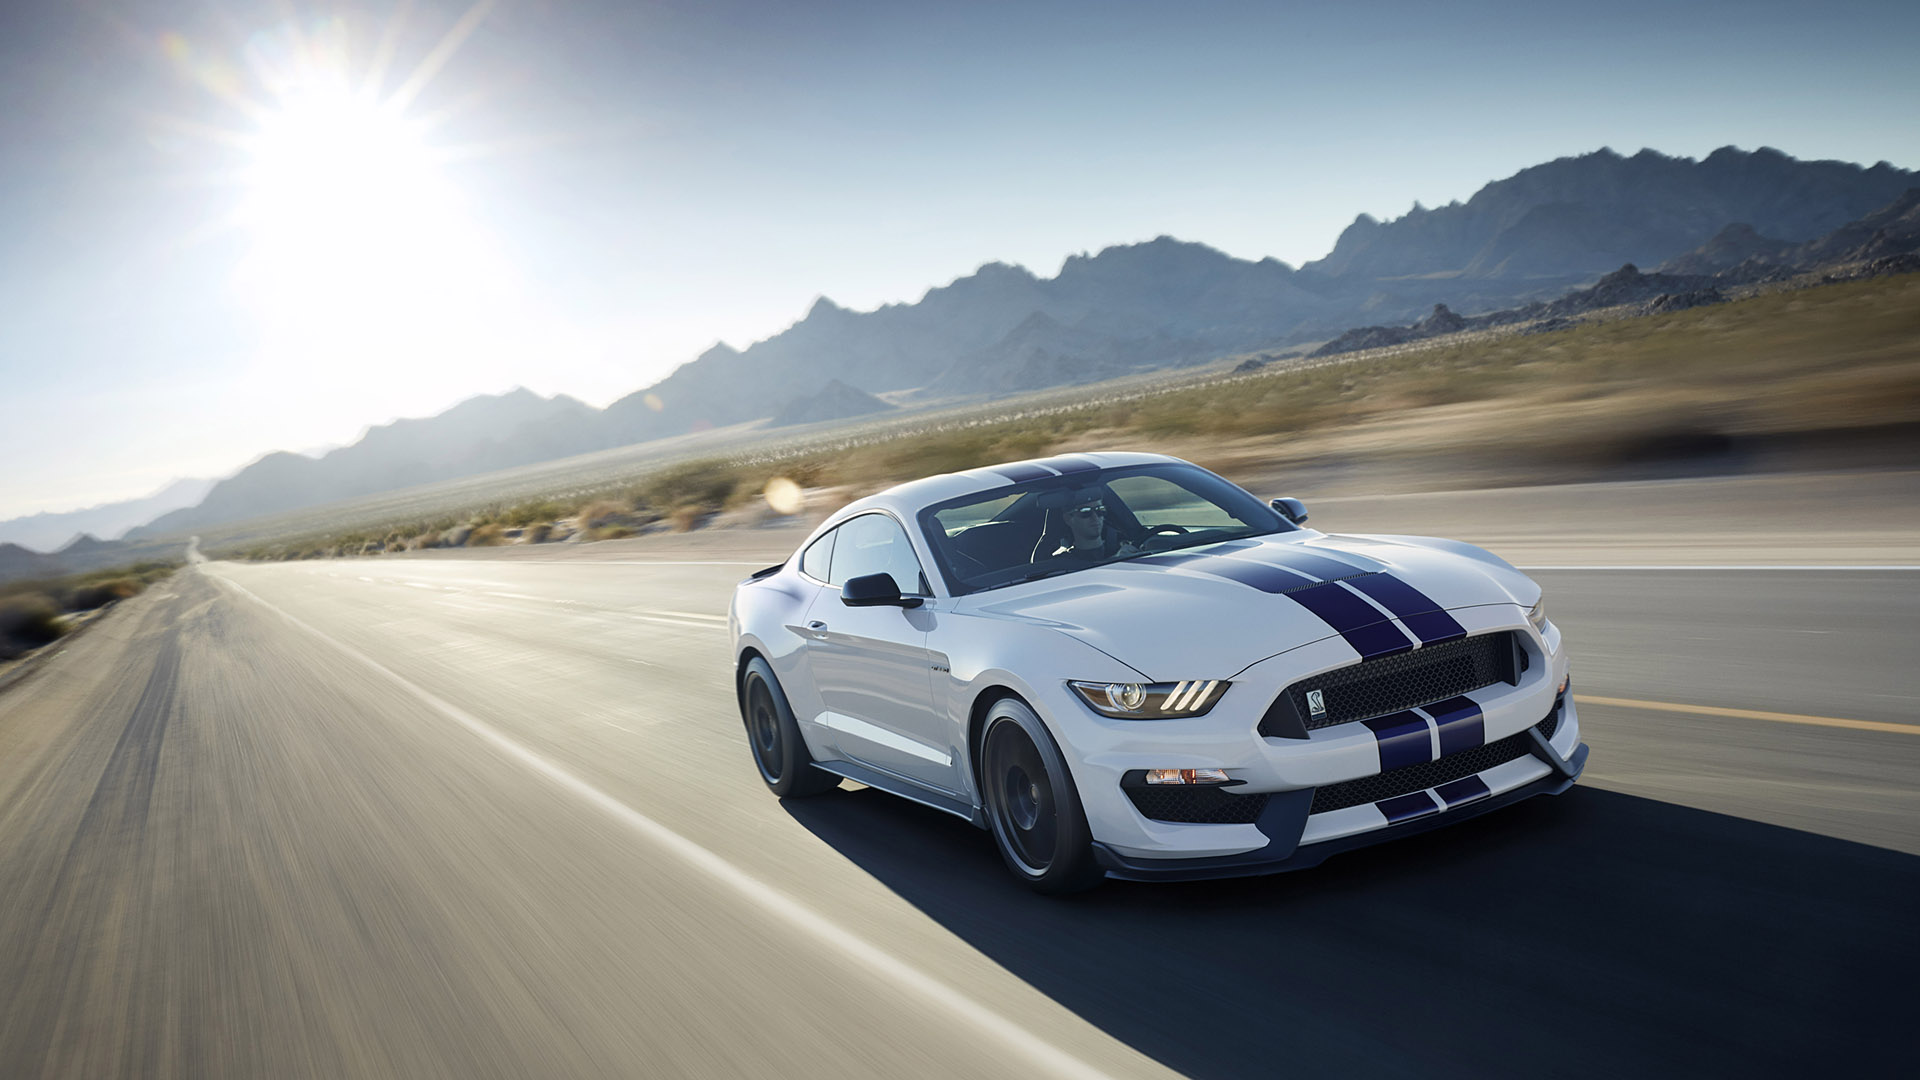 Ford Shelby Mustang Gt350 Wallpaper Amp HD Image